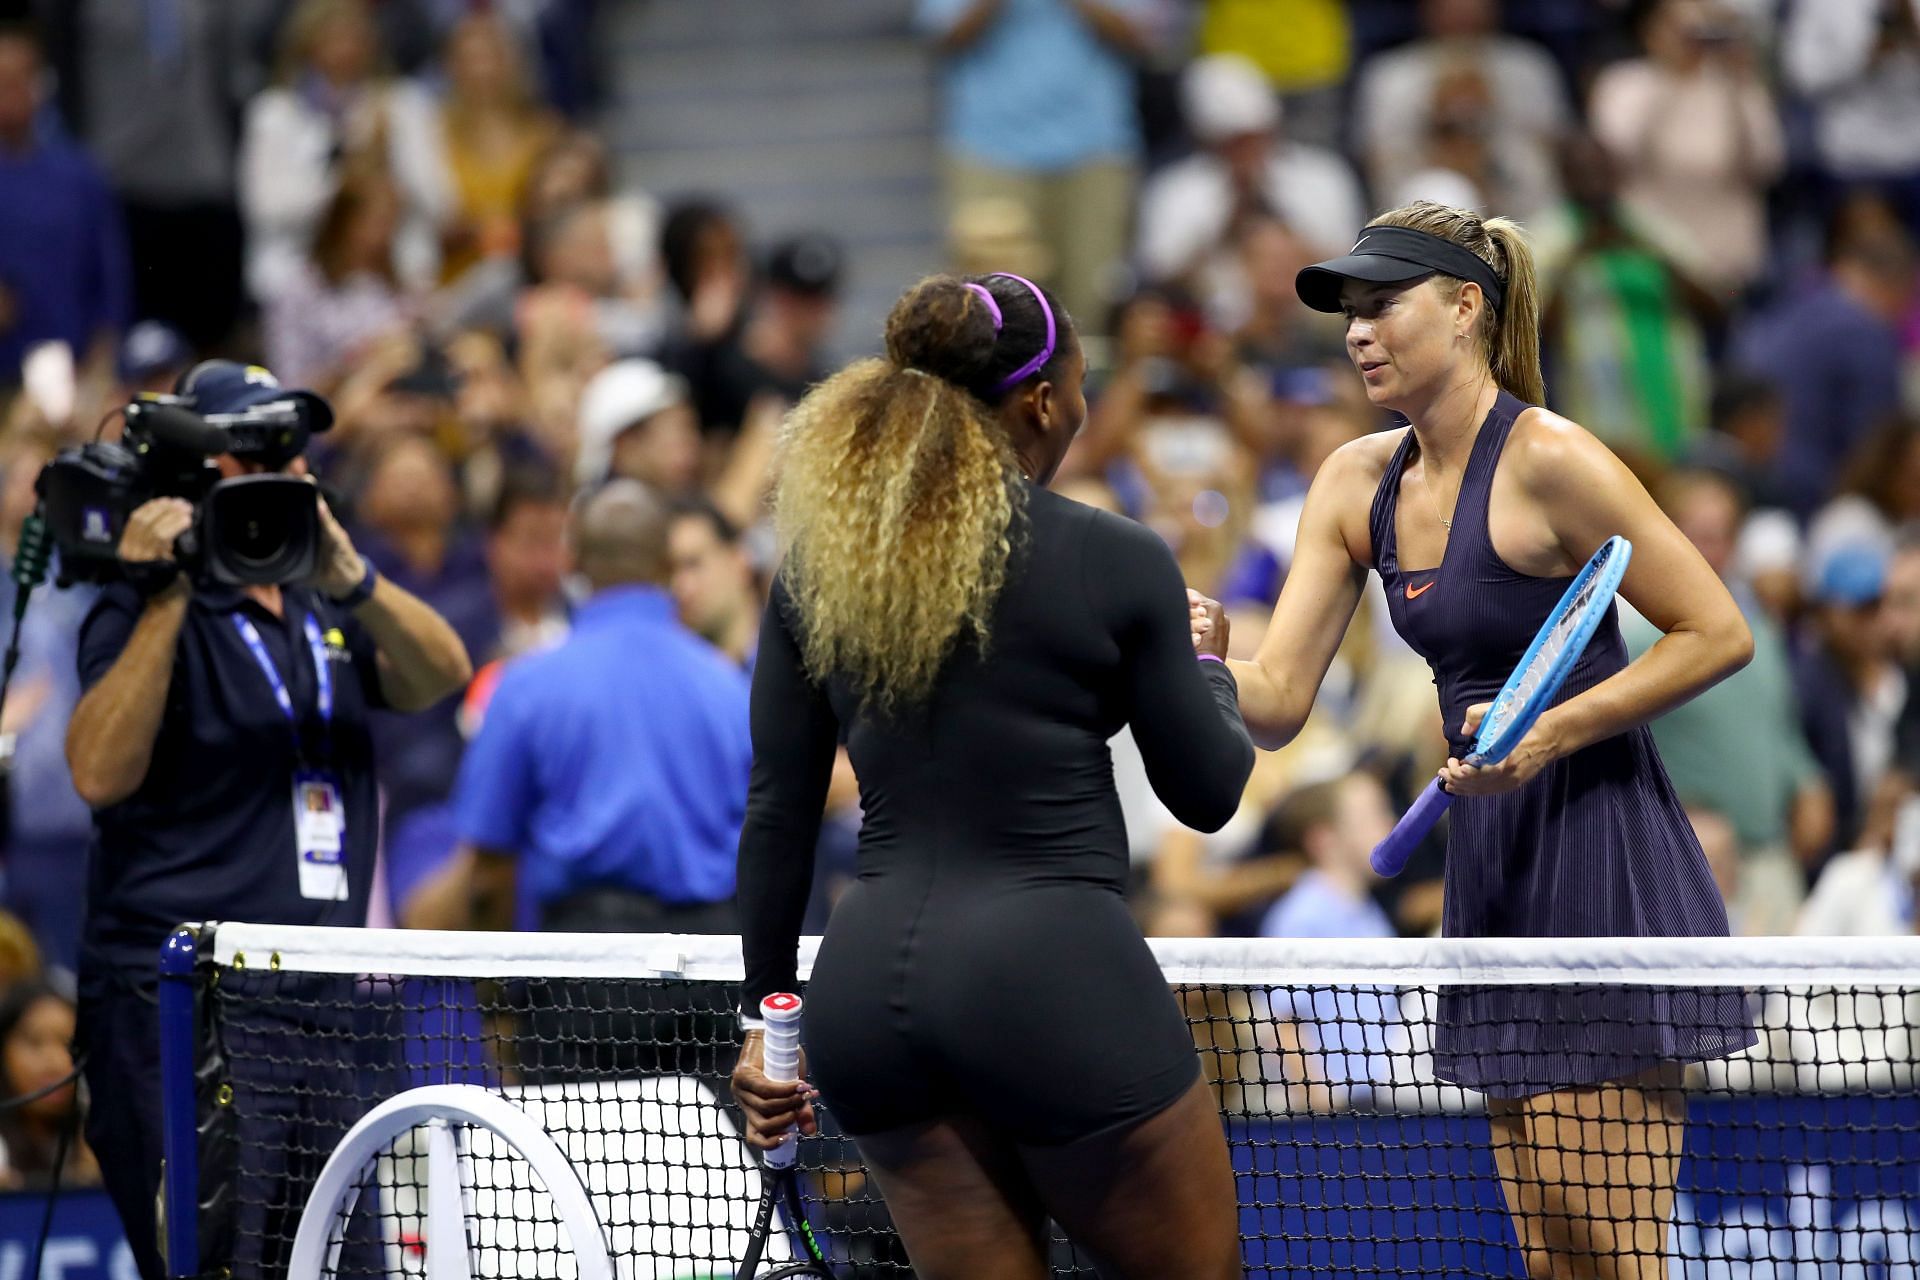 Sharapova and Williams after their match at the 2019 US Open